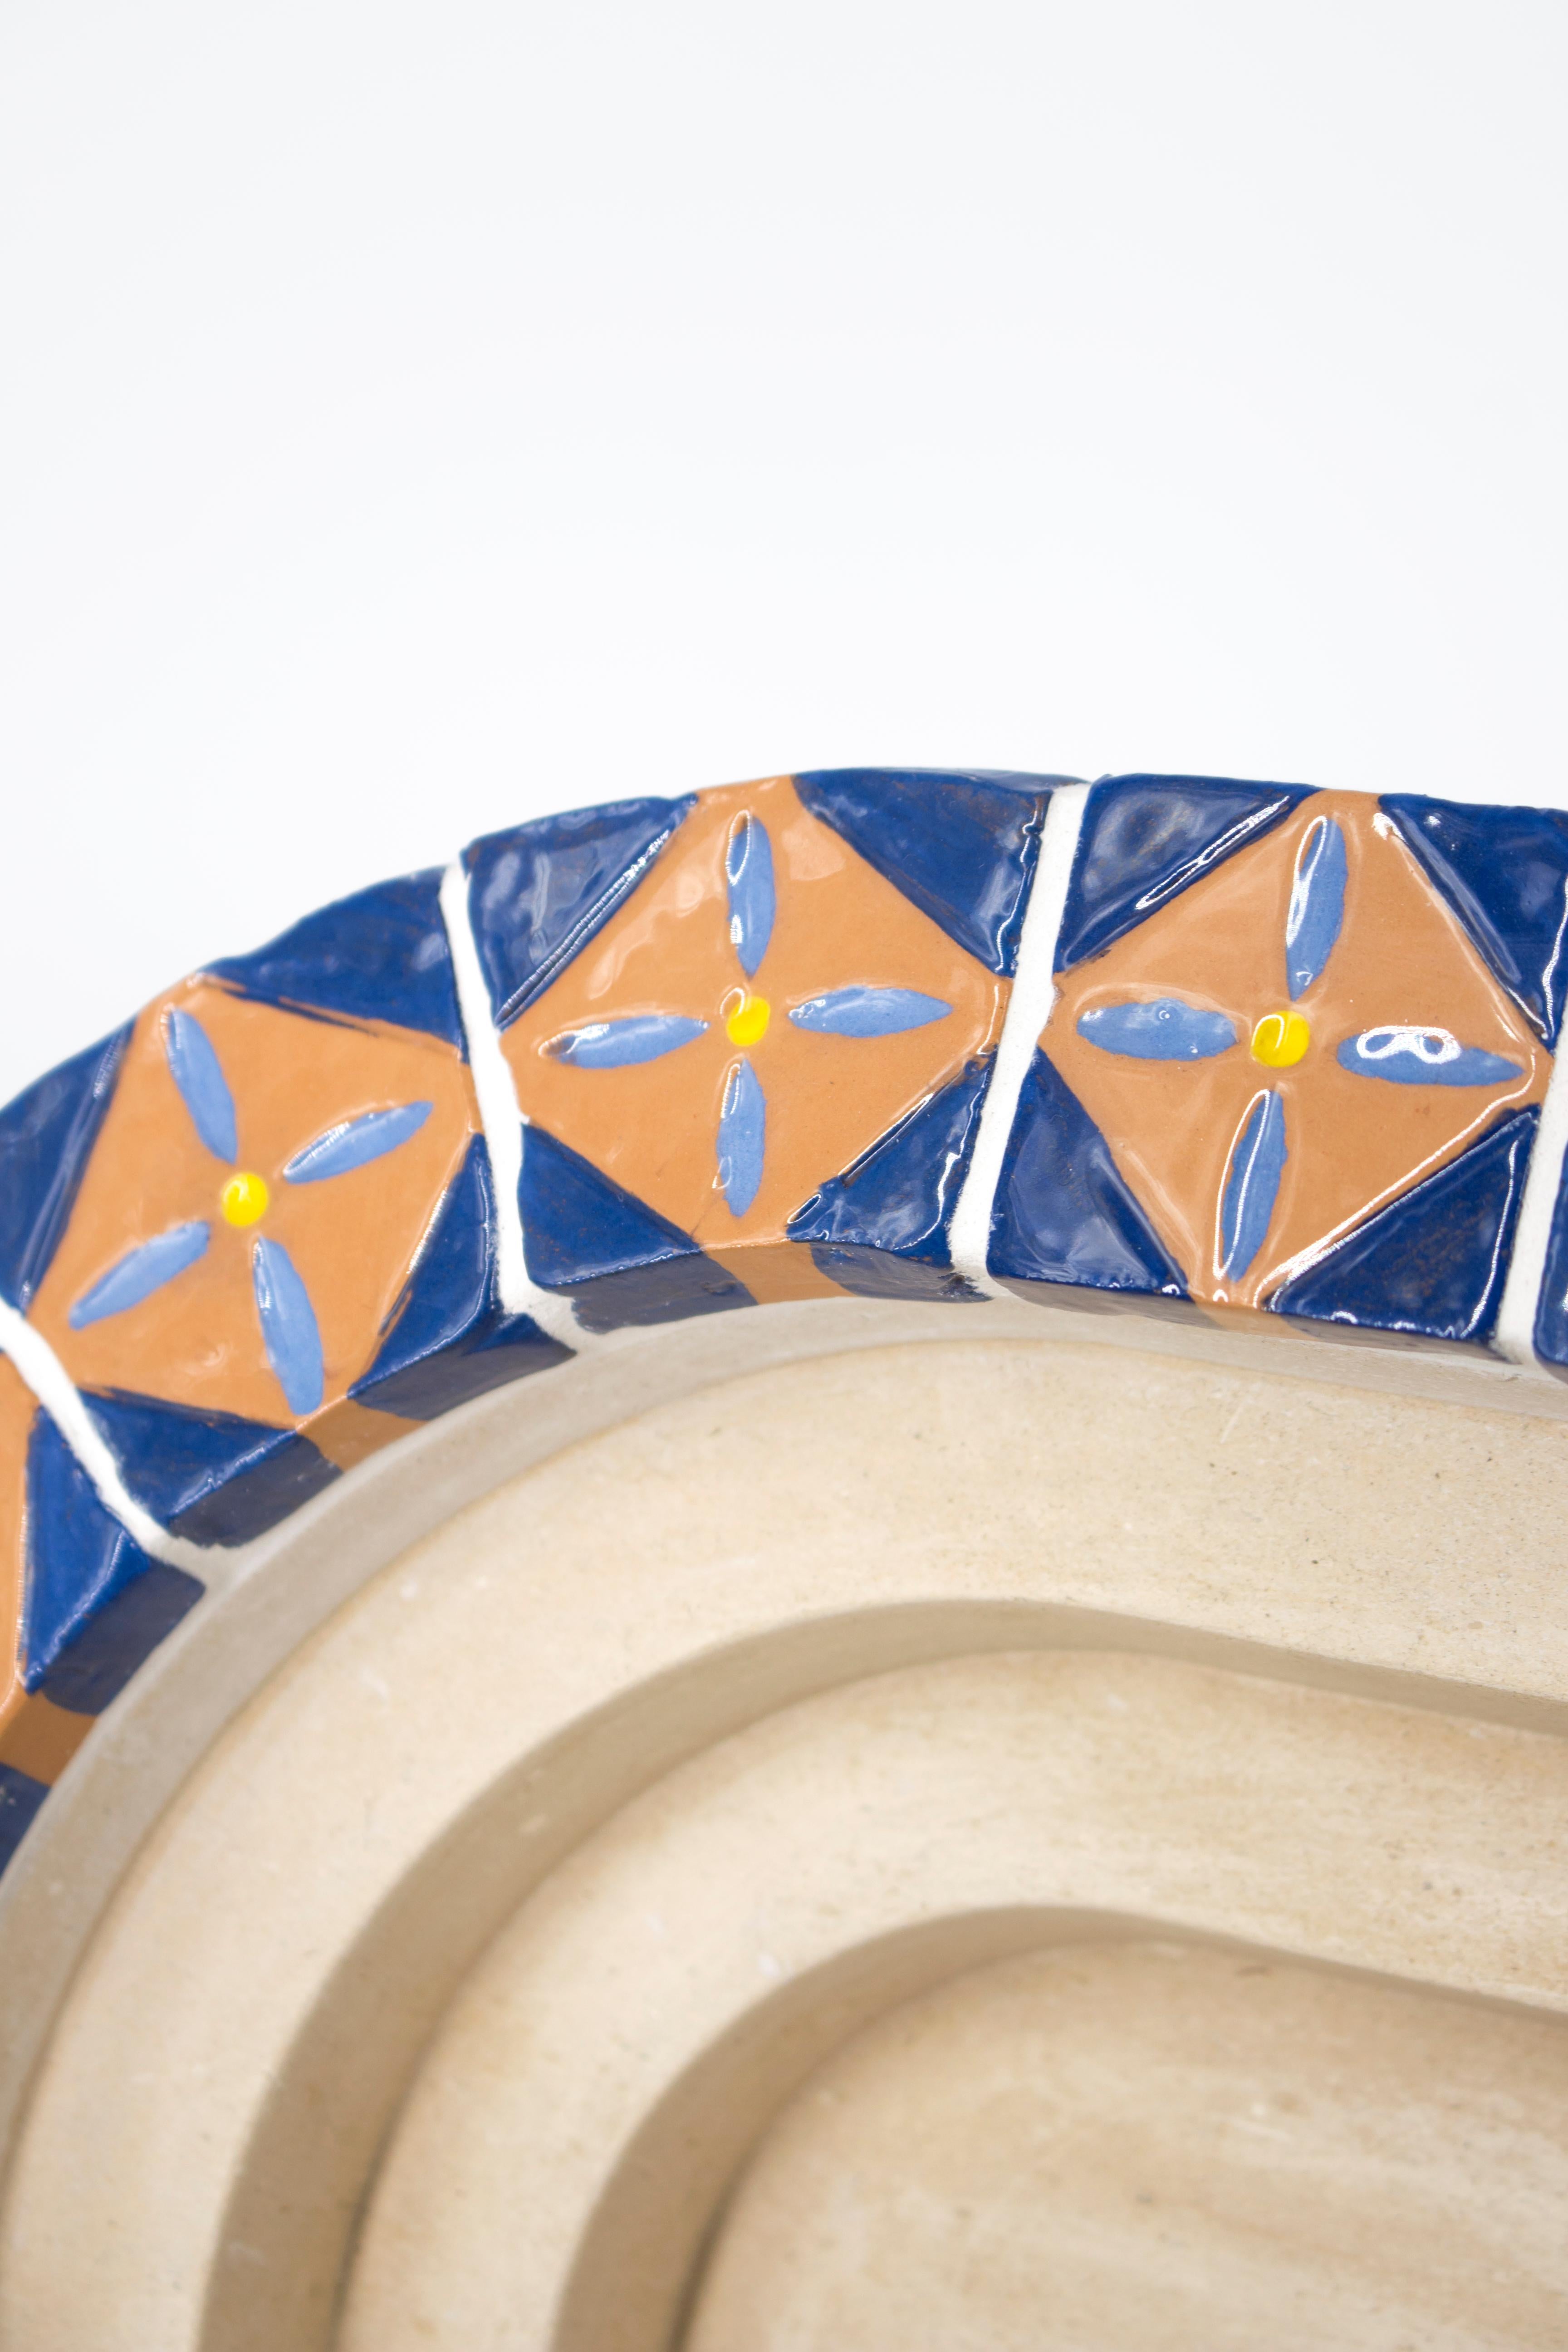 Hand-Crafted Apollineo Arena Centerpiece in Leccese Stone and Hand-Painted Maiolica For Sale